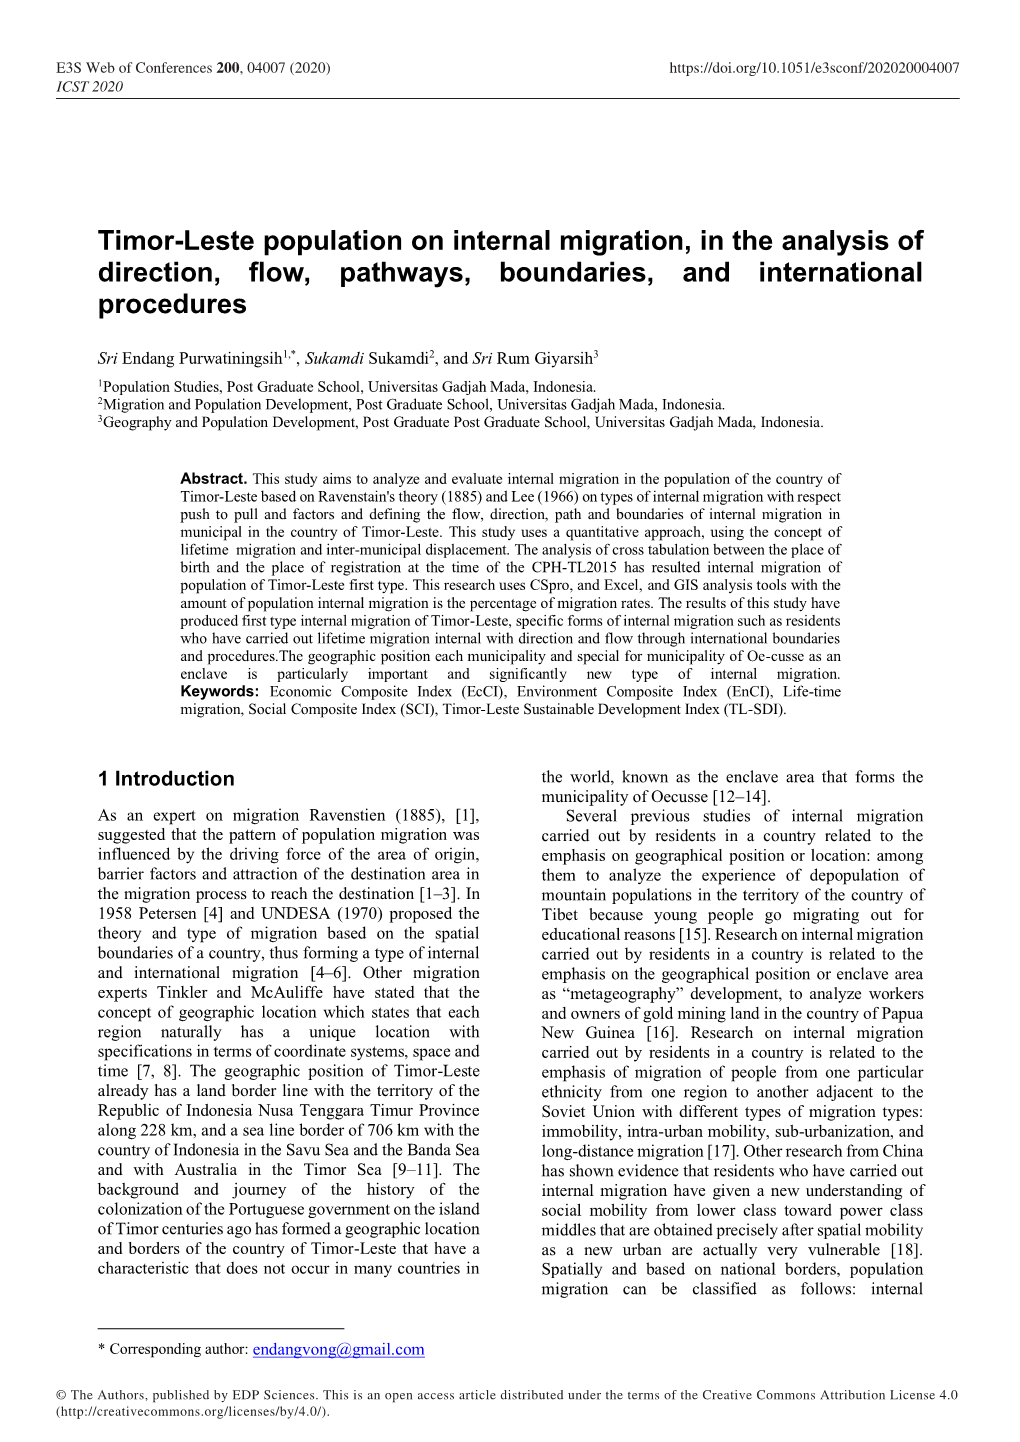 Timor-Leste Population on Internal Migration, in the Analysis of Direction, Flow, Pathways, Boundaries, and International Procedures